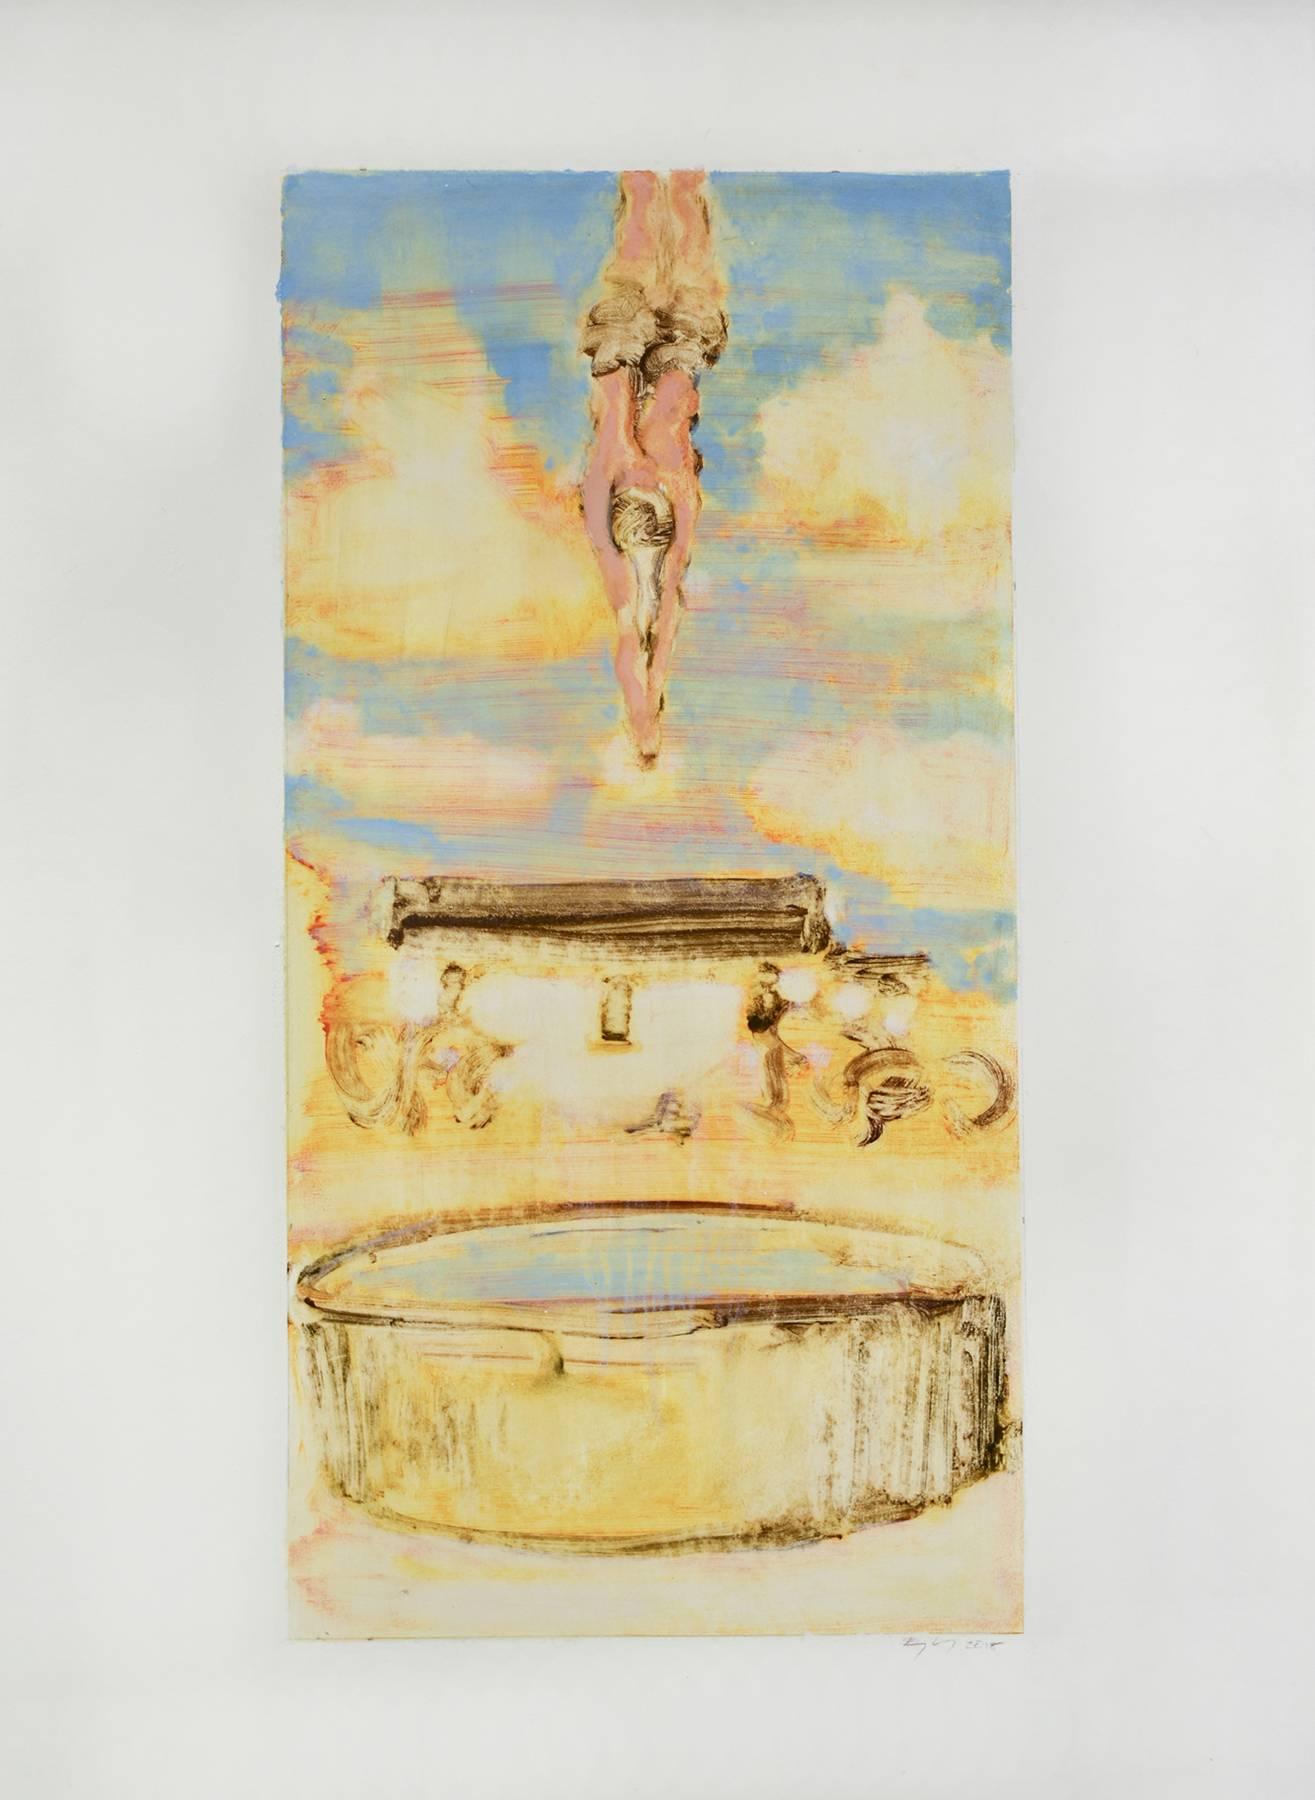 Diver: Abstracted Figurative Print, Swimmer in a Blue, Yellow, & Pink Landscape  - Beige Landscape Print by David Konigsberg